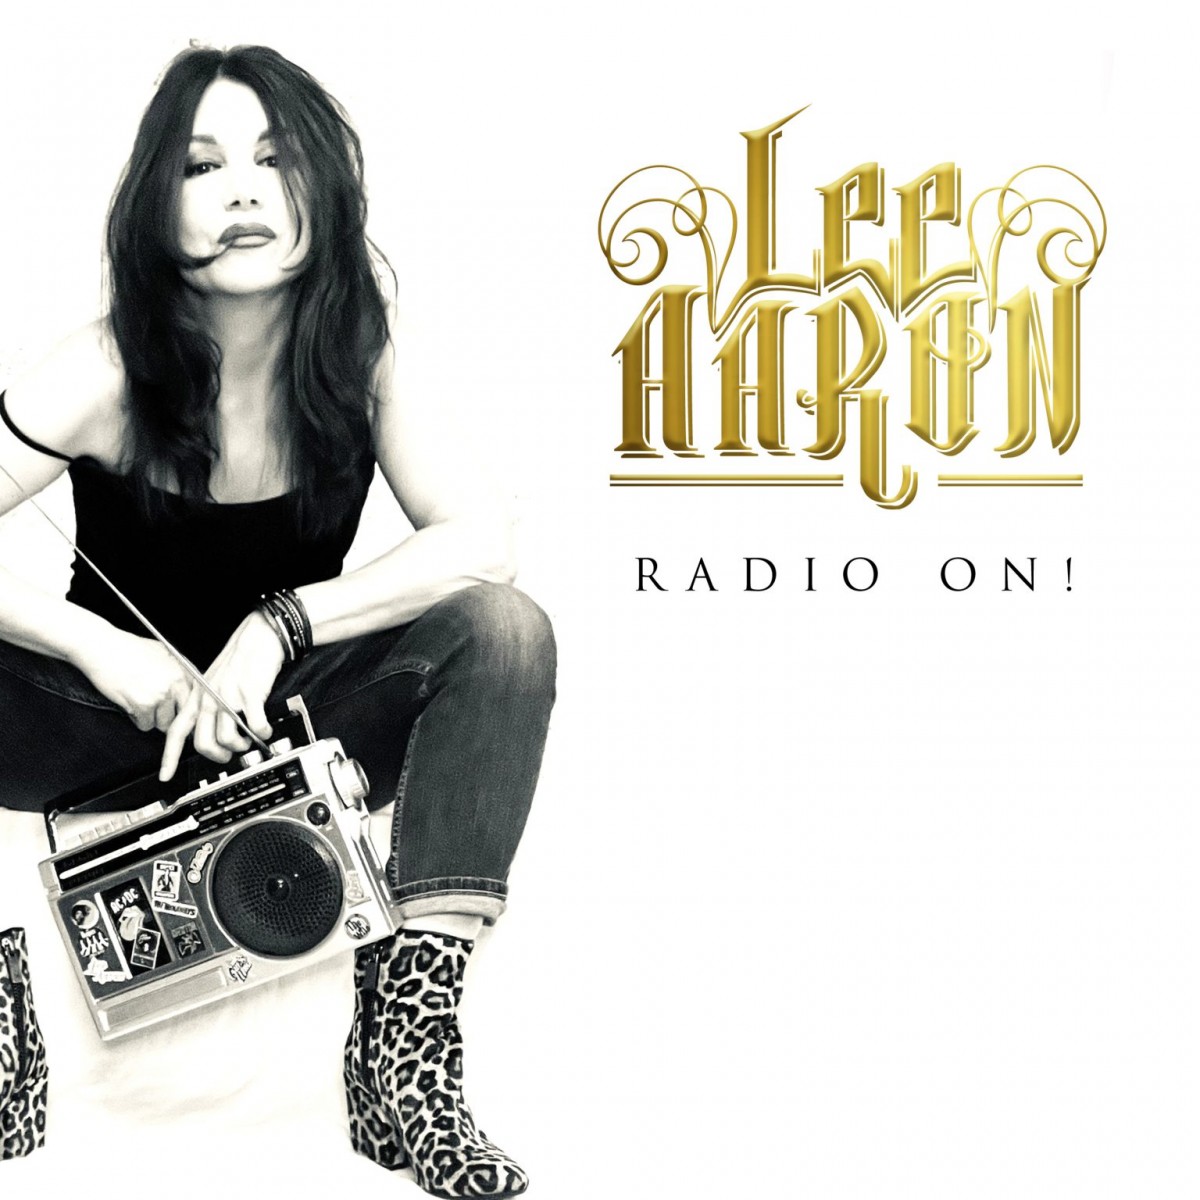 Lee Aaron – Rocks Out With Radio On!